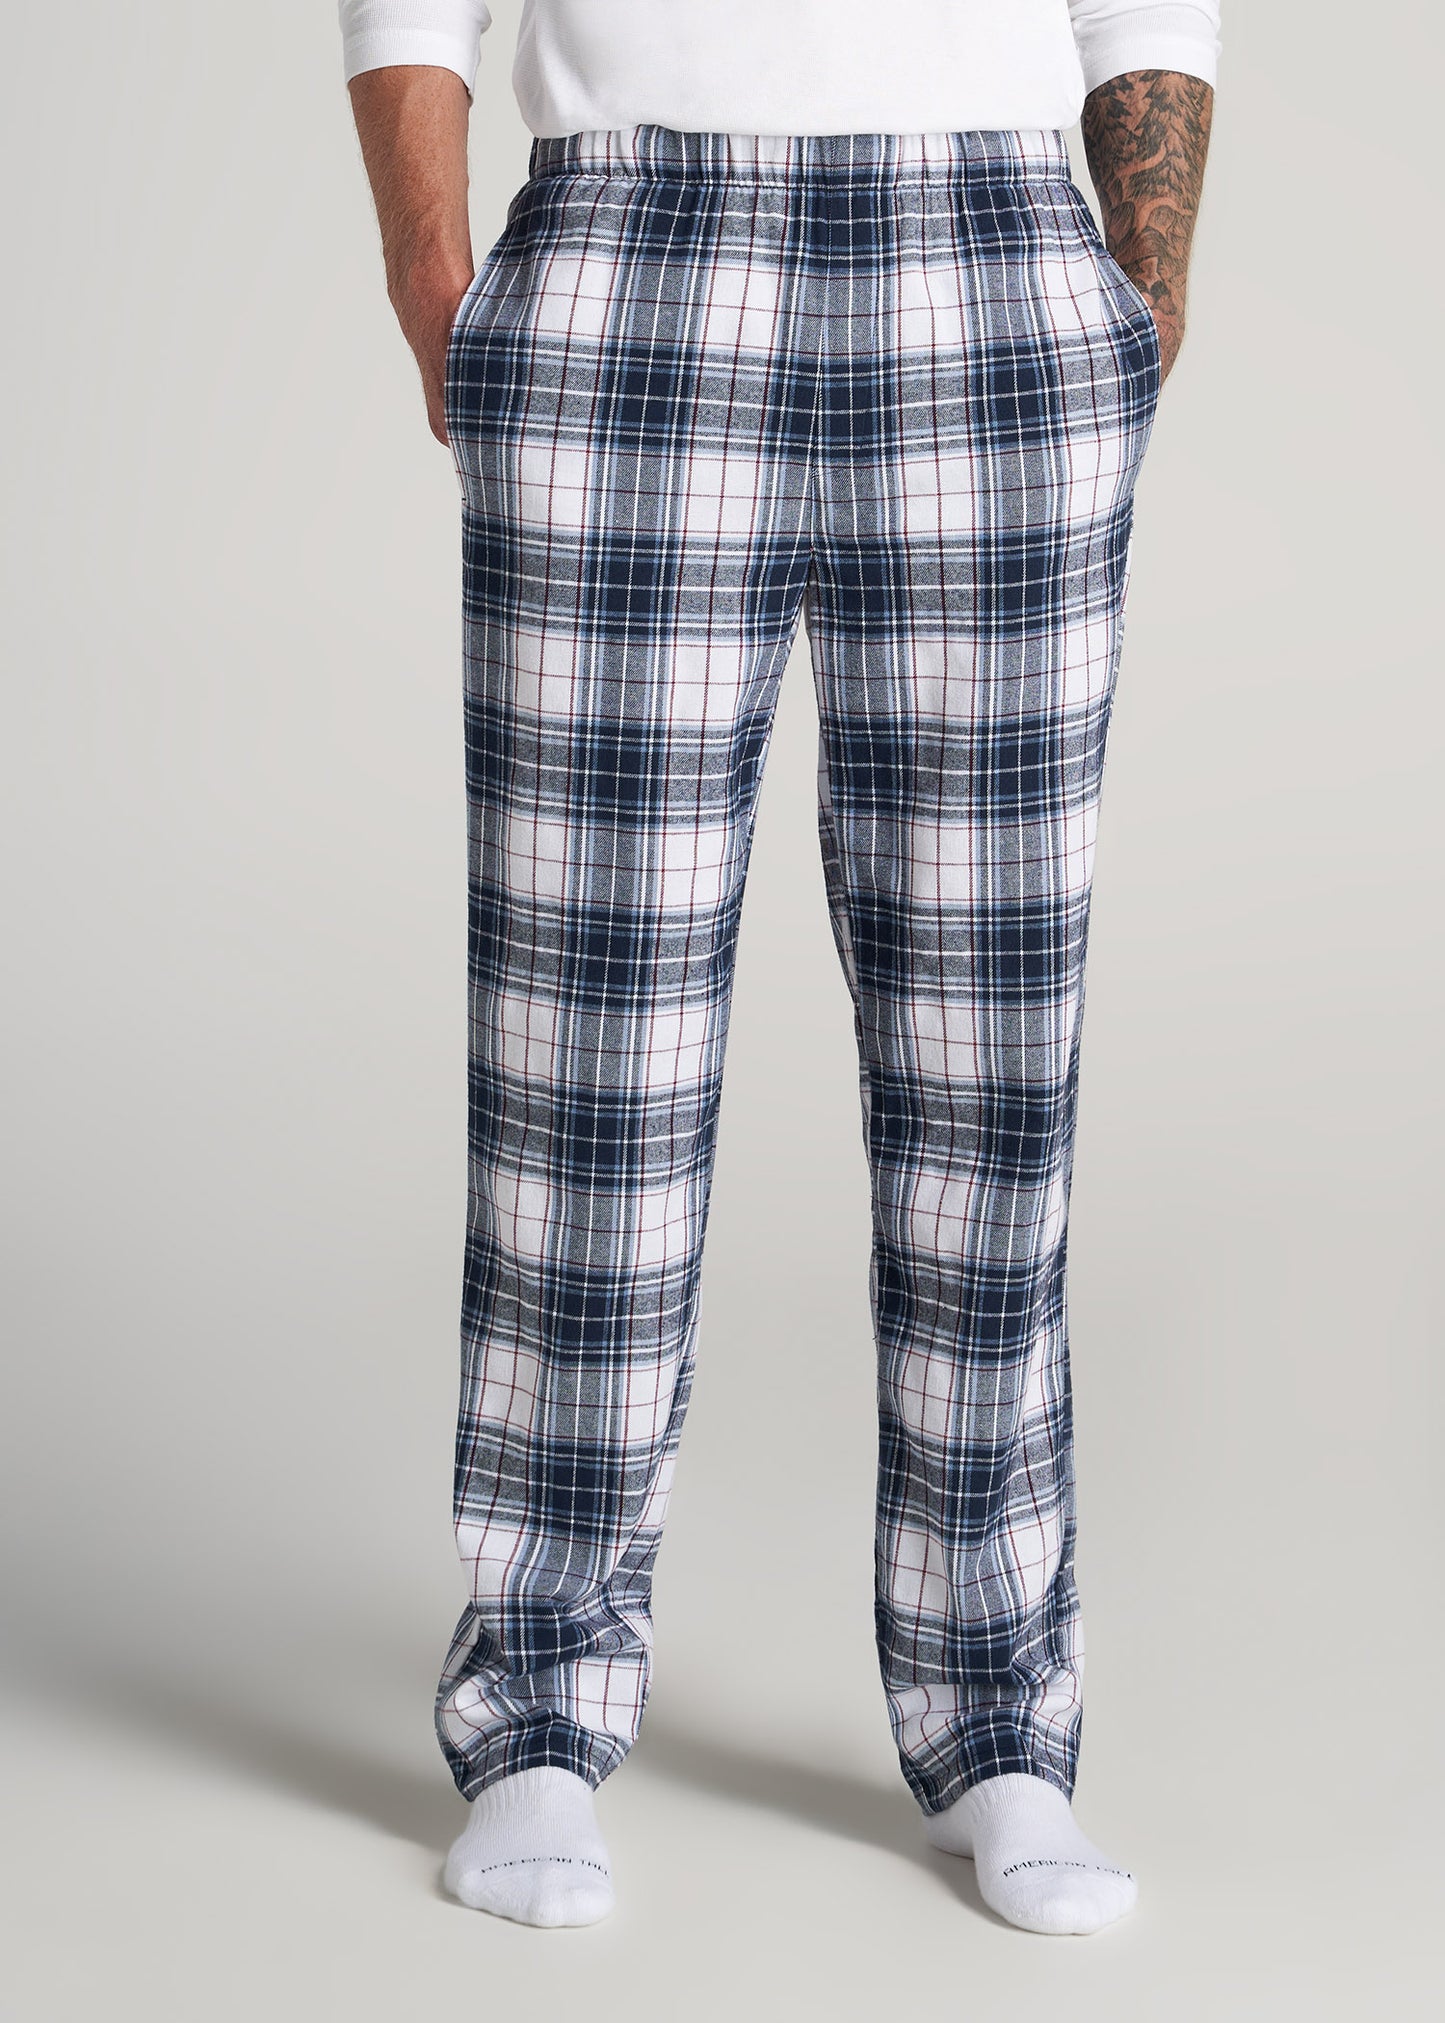 Old Navy Maternity Printed Flannel Pajama Pants | Scarborough Town Centre